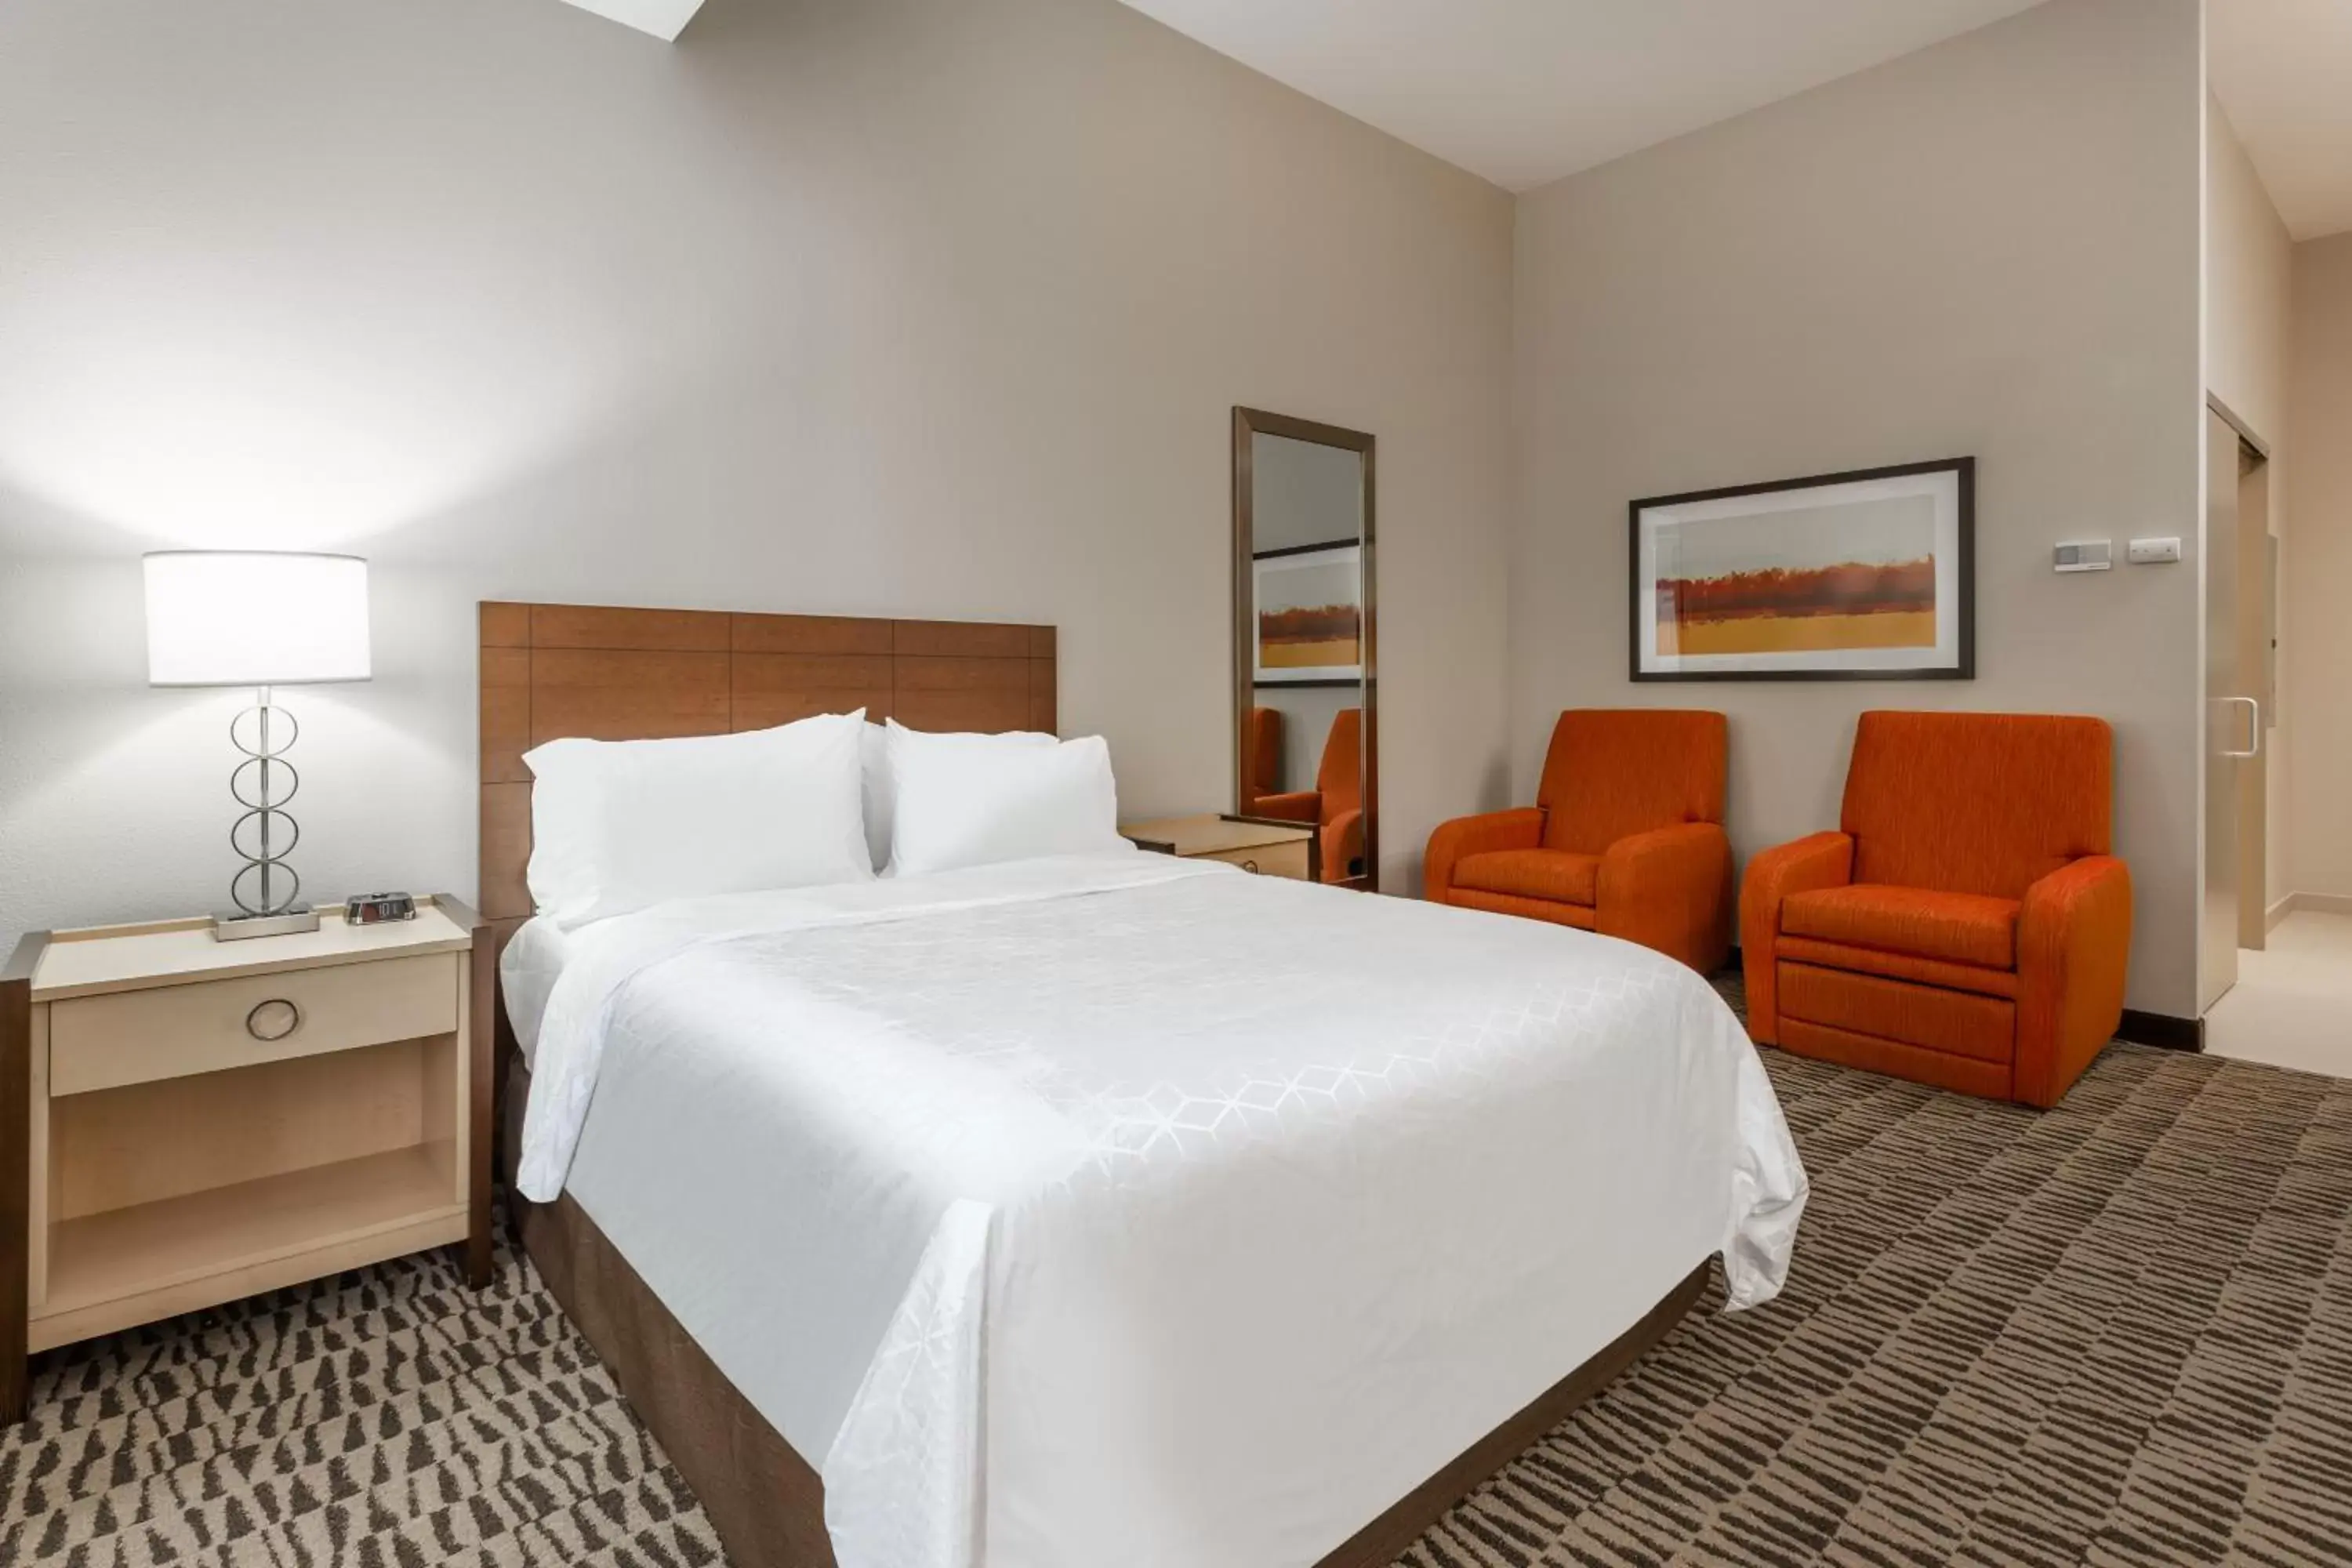 Candlewood Suites Fargo South-Medical Center, an IHG Hotel